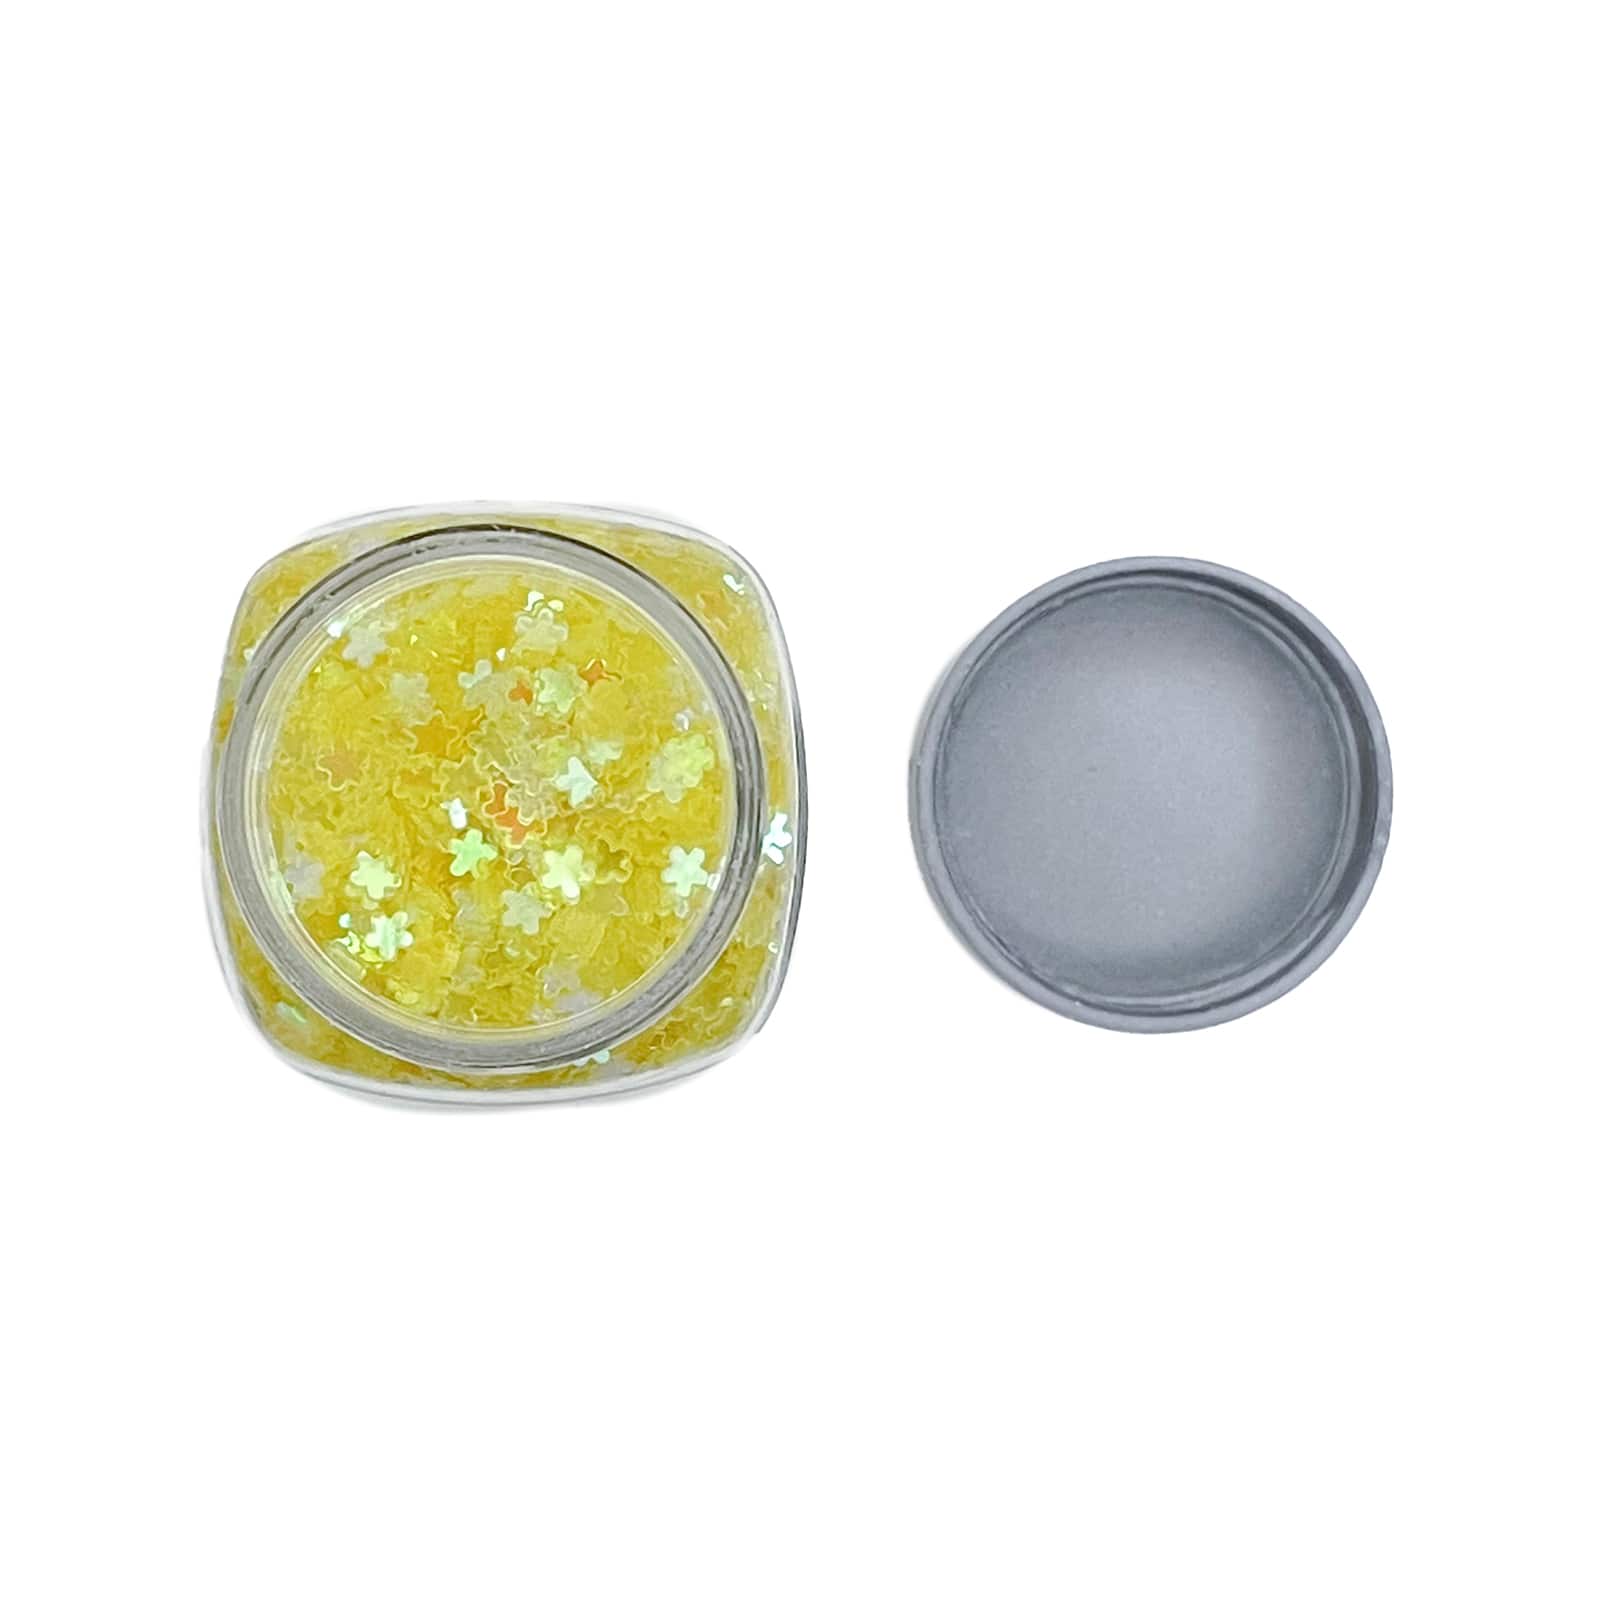 Signature Super Chunky Glitter, Yellow Daisies by Recollections&#x2122;